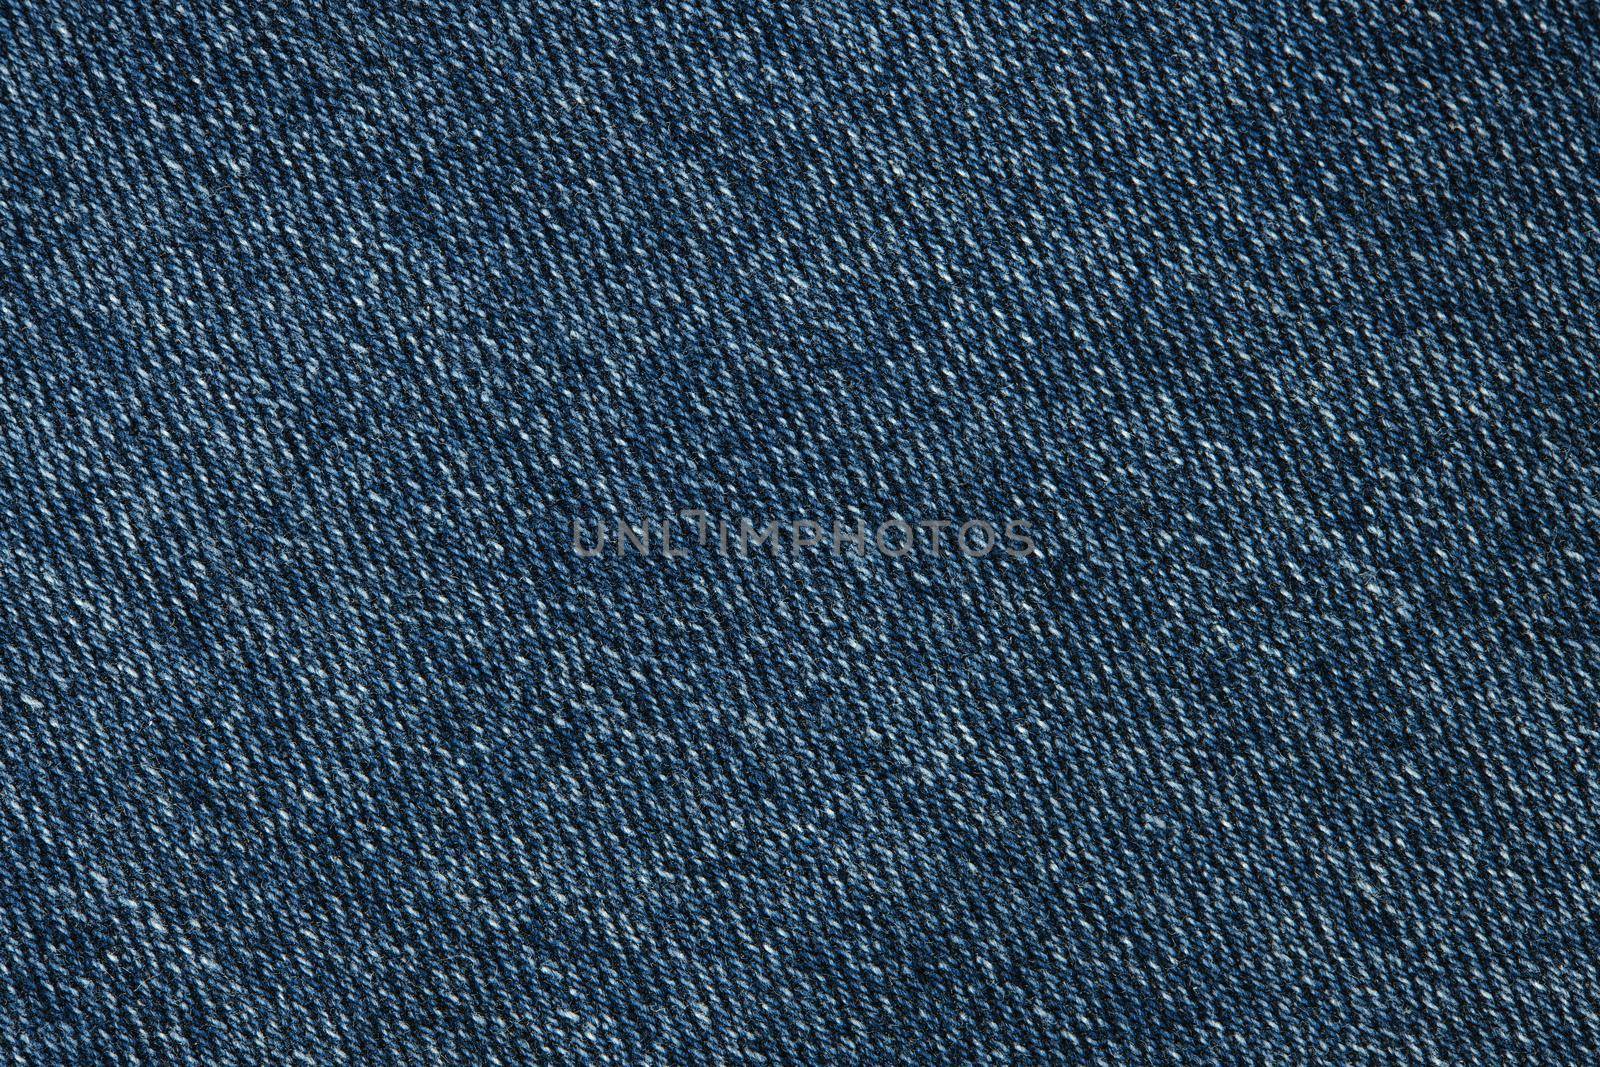 Blue jeans background and texture. Close up of blue jeans background. Denim texture by EvgeniyQW